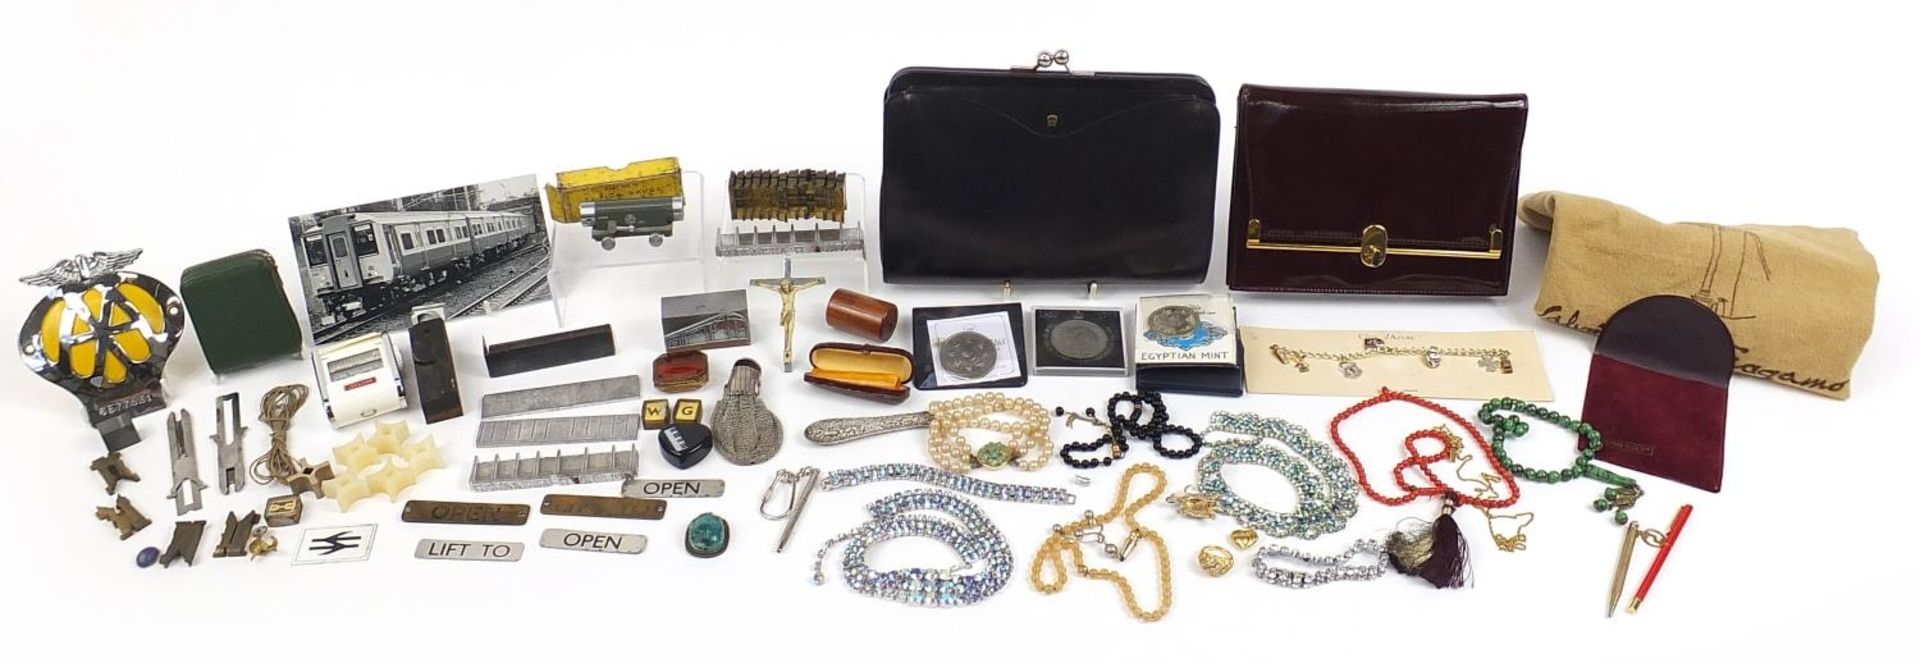 Costume jewellery and sundry items including amber coloured cheroot, ladies clutch bags, AA car